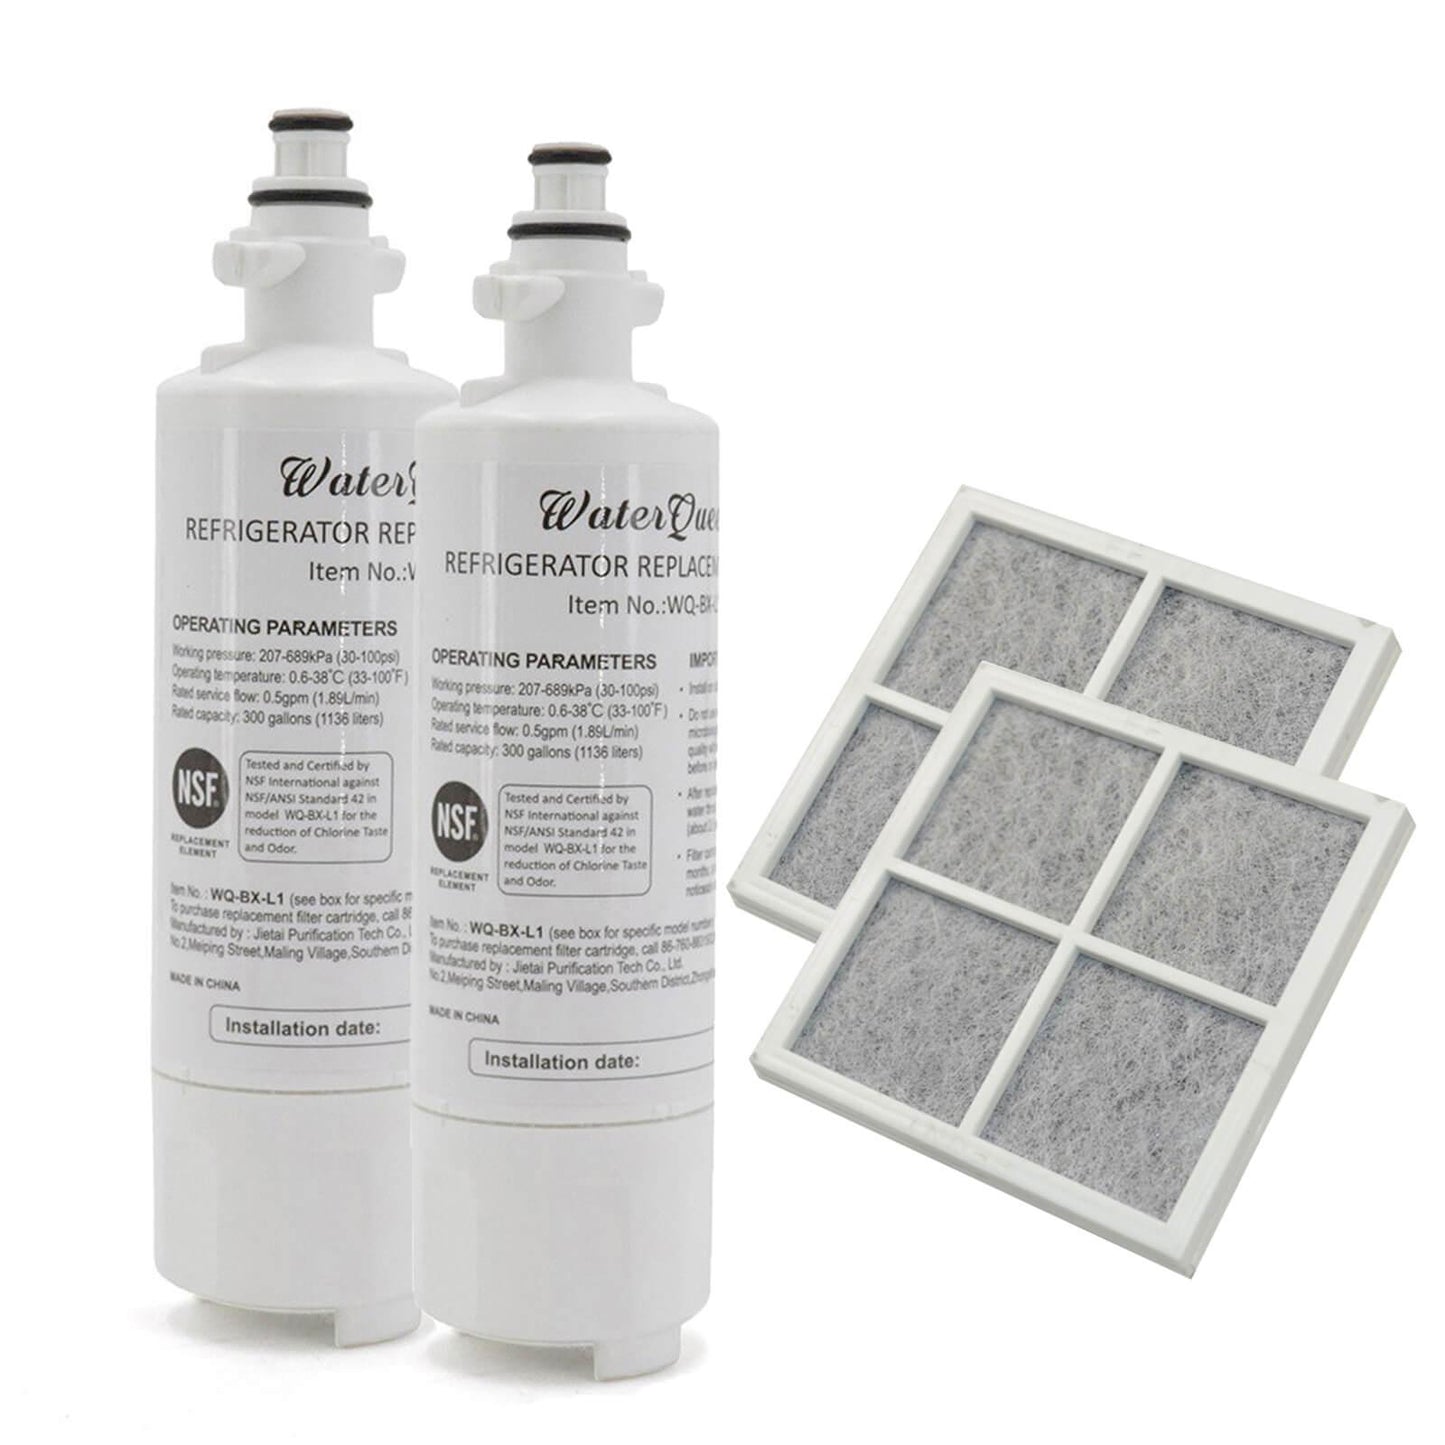 LT700P Water Filter and LT120F Air Filter for LG Fridge Sparesbarn